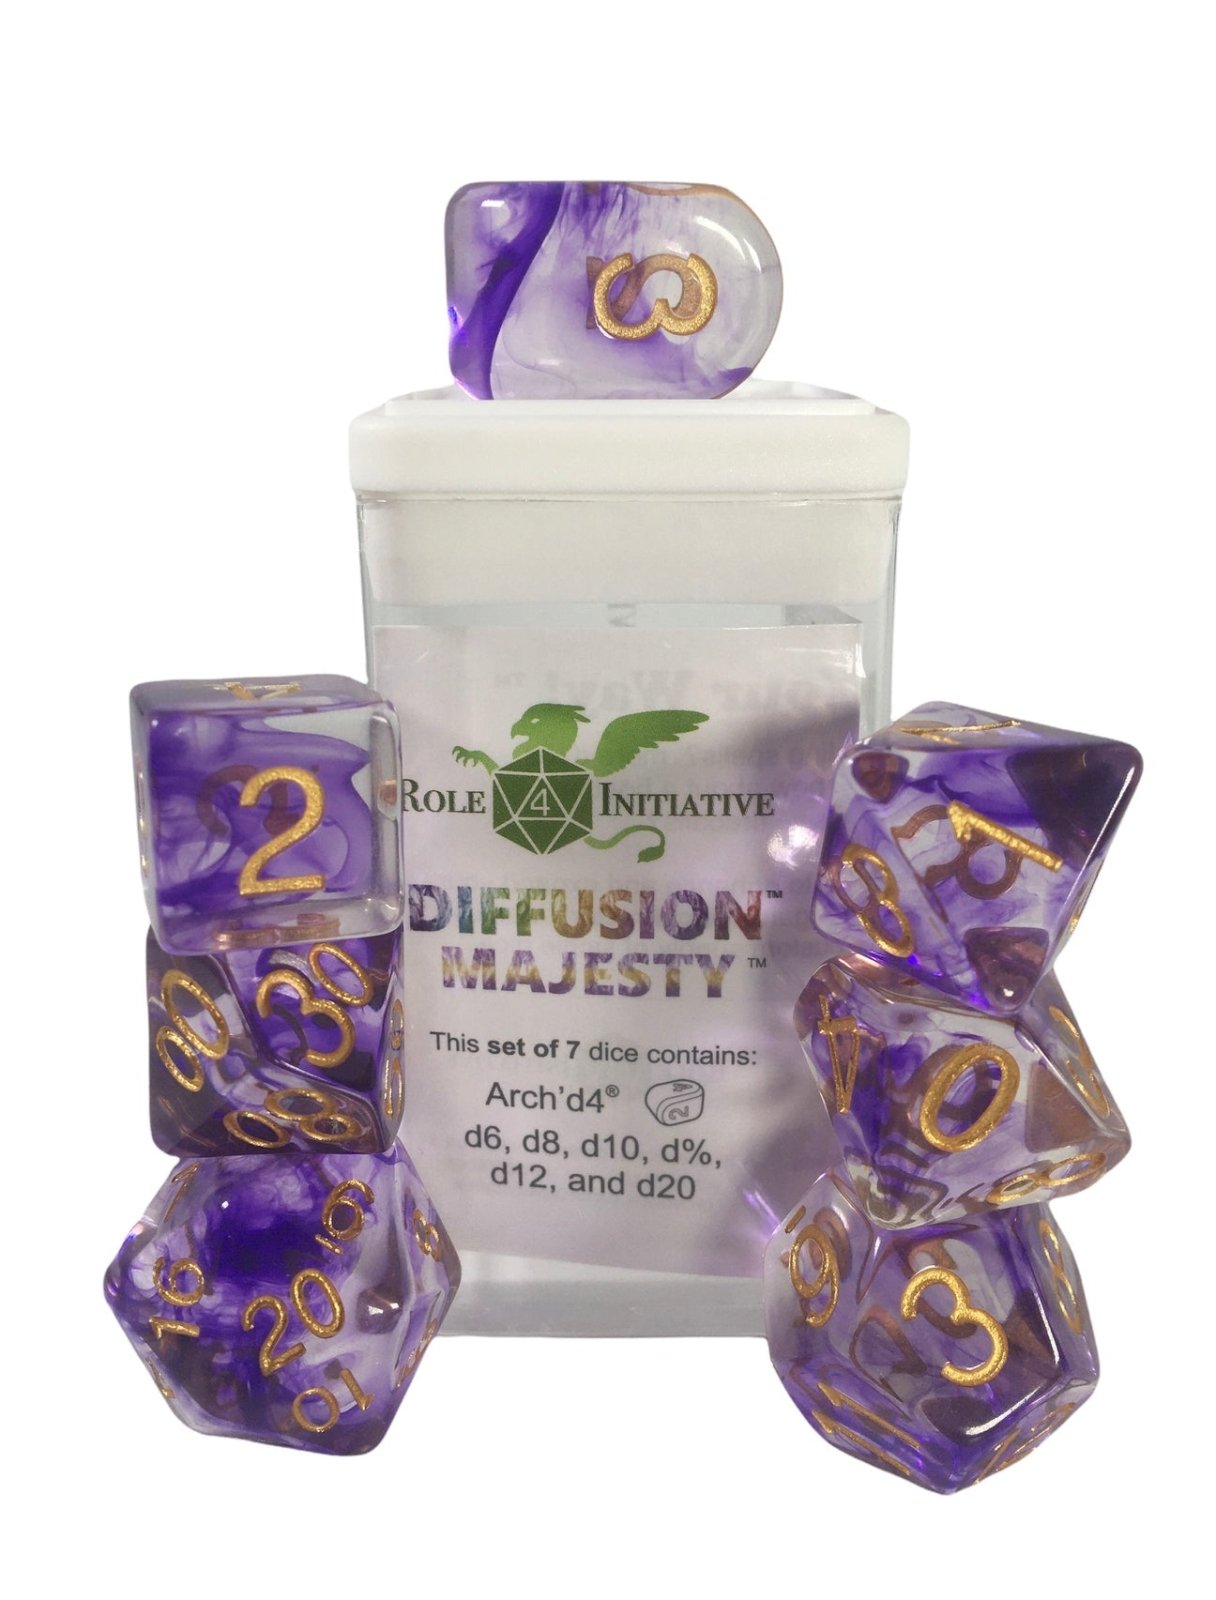 Diffusion Majesty - 7 dice set (with Arch’d4™) - The Fourth Place